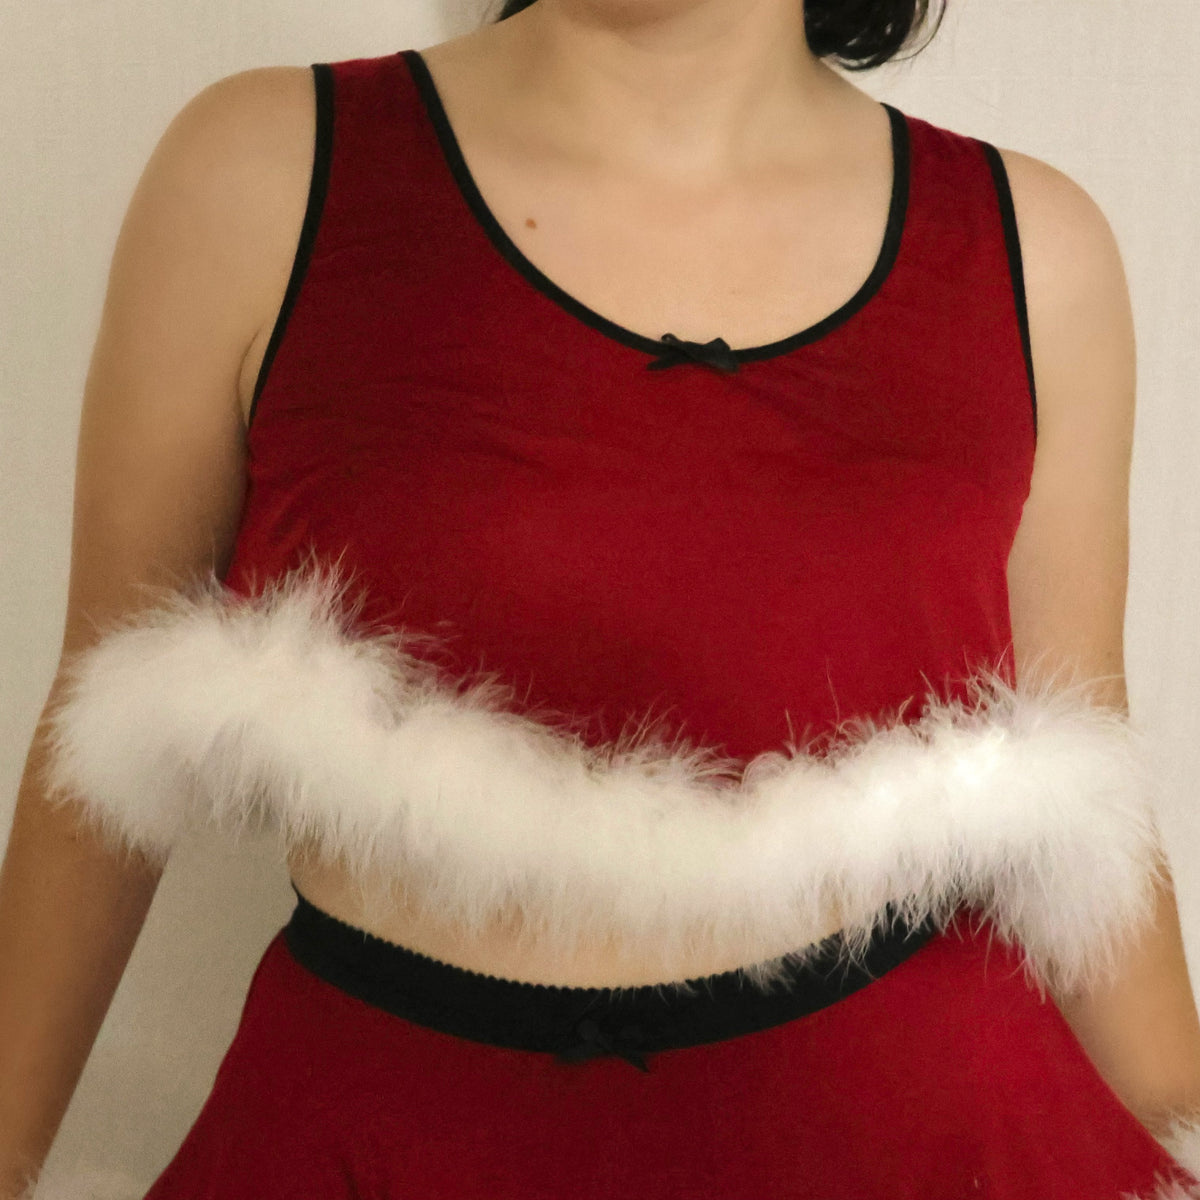 Have Yourself a Cherry Little Christmas - Cropped Camisole